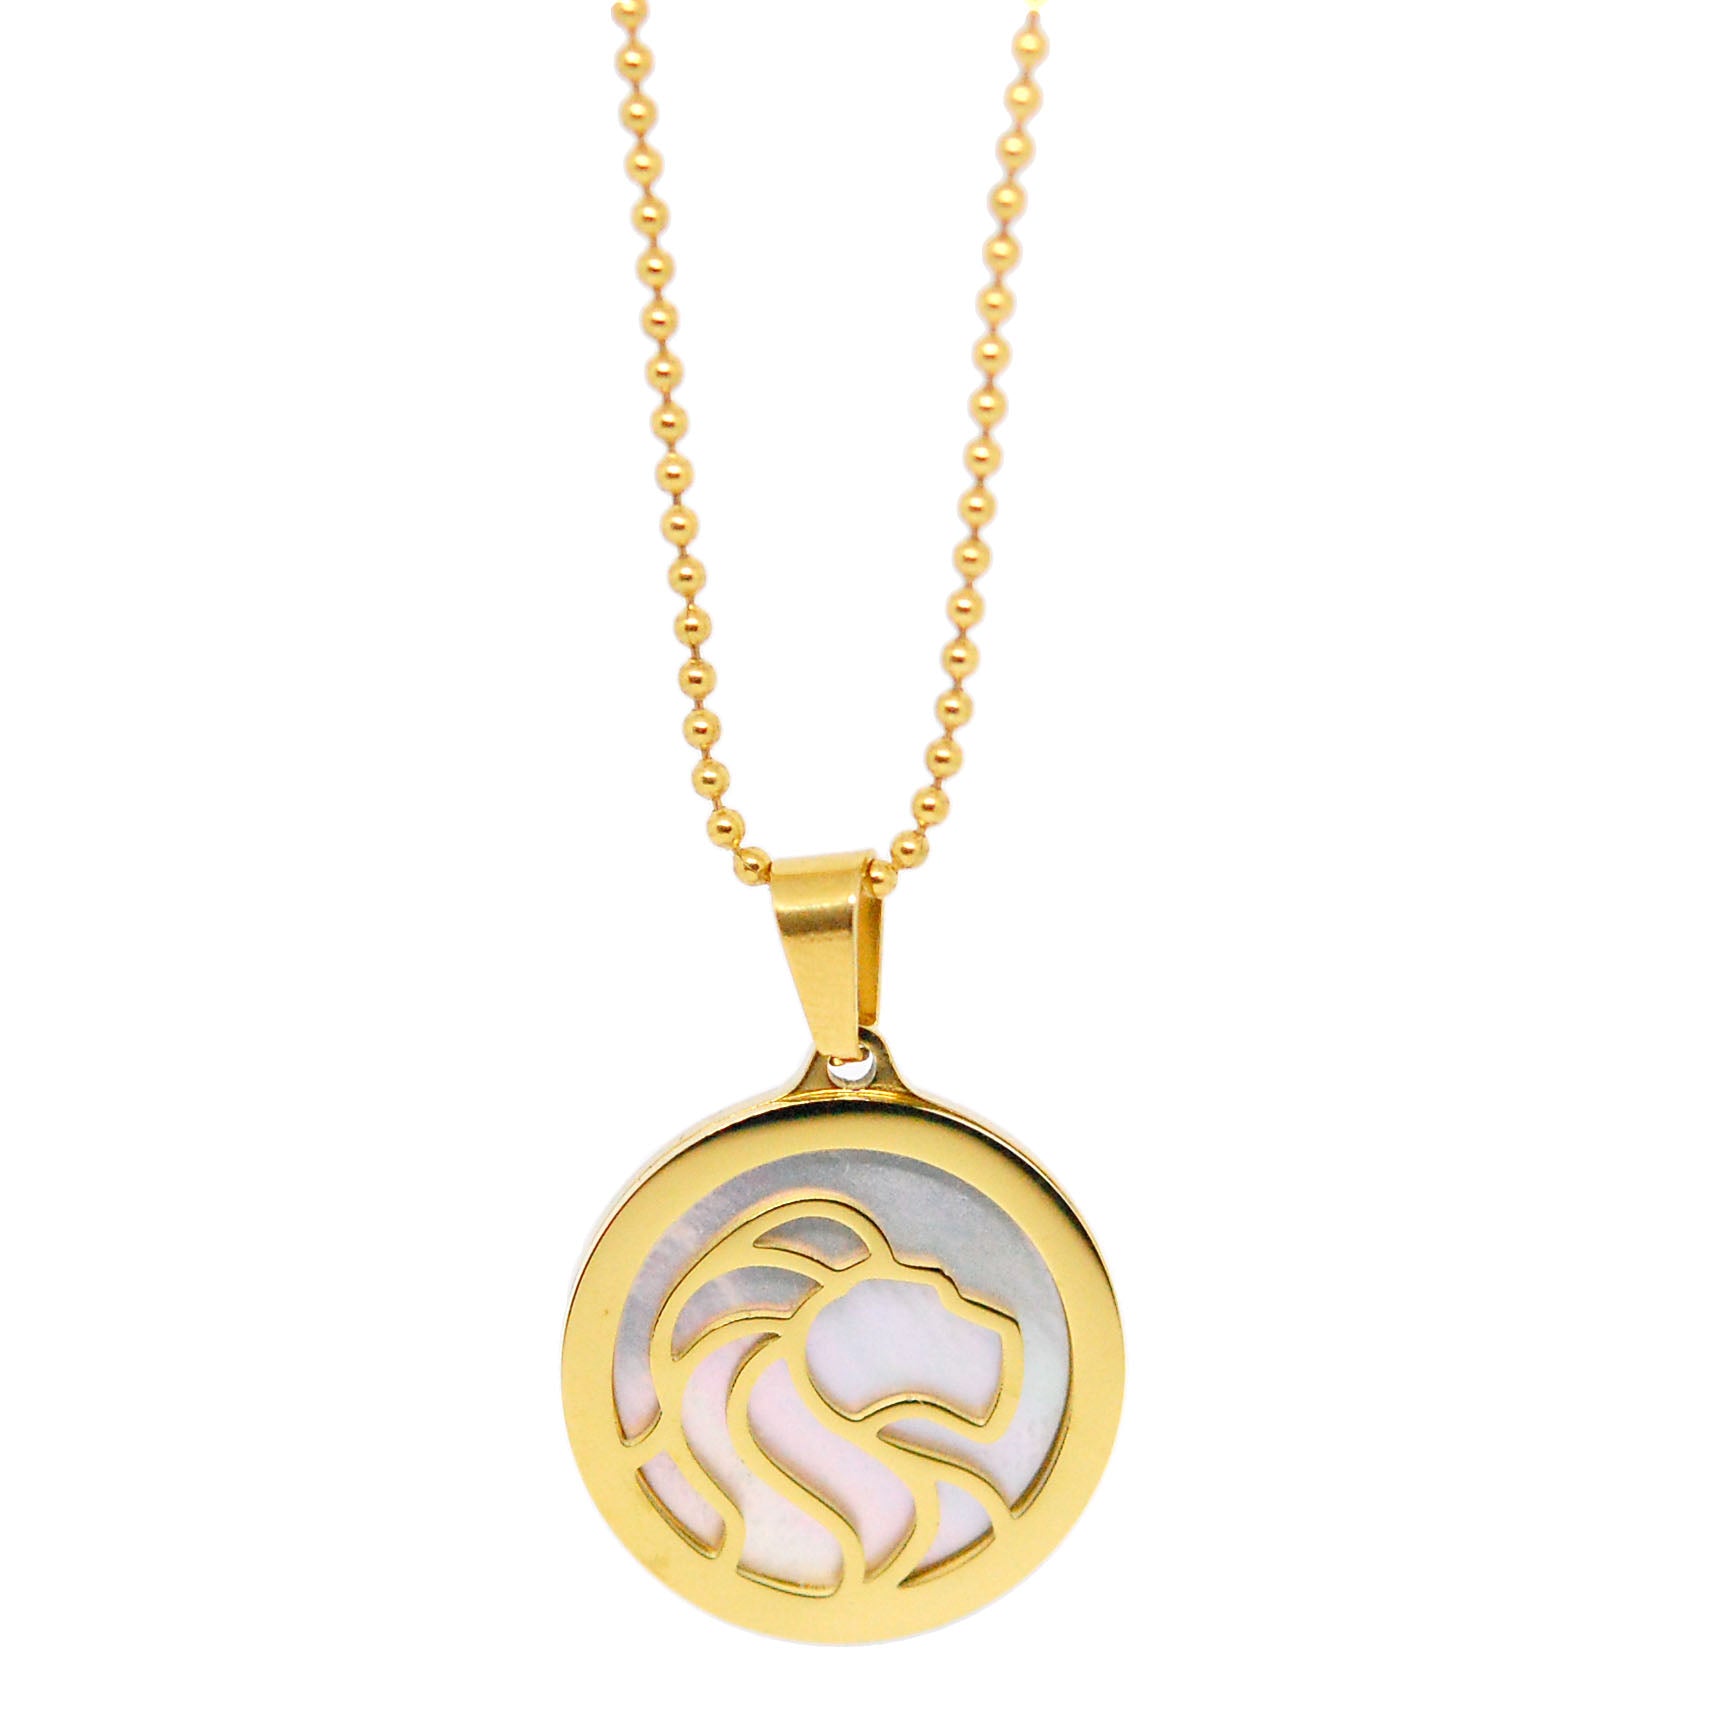 ESN 7963: All IPG Mop Leo Zodiac Necklace w/ 18" IPG Ball Chain